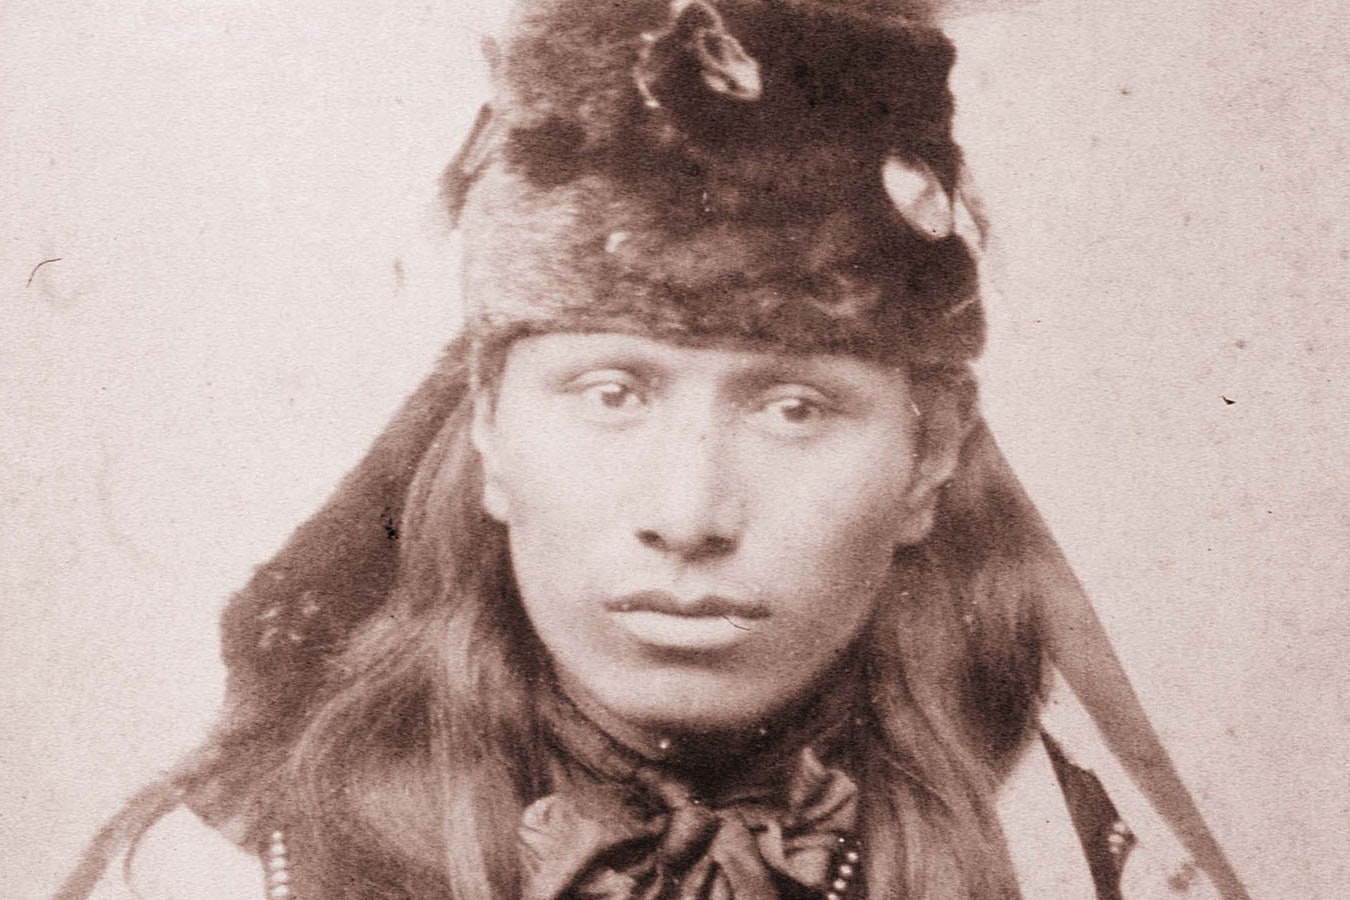 Black Elk was born in December 1863 along the Little Powder River in territory that would become Wyoming.